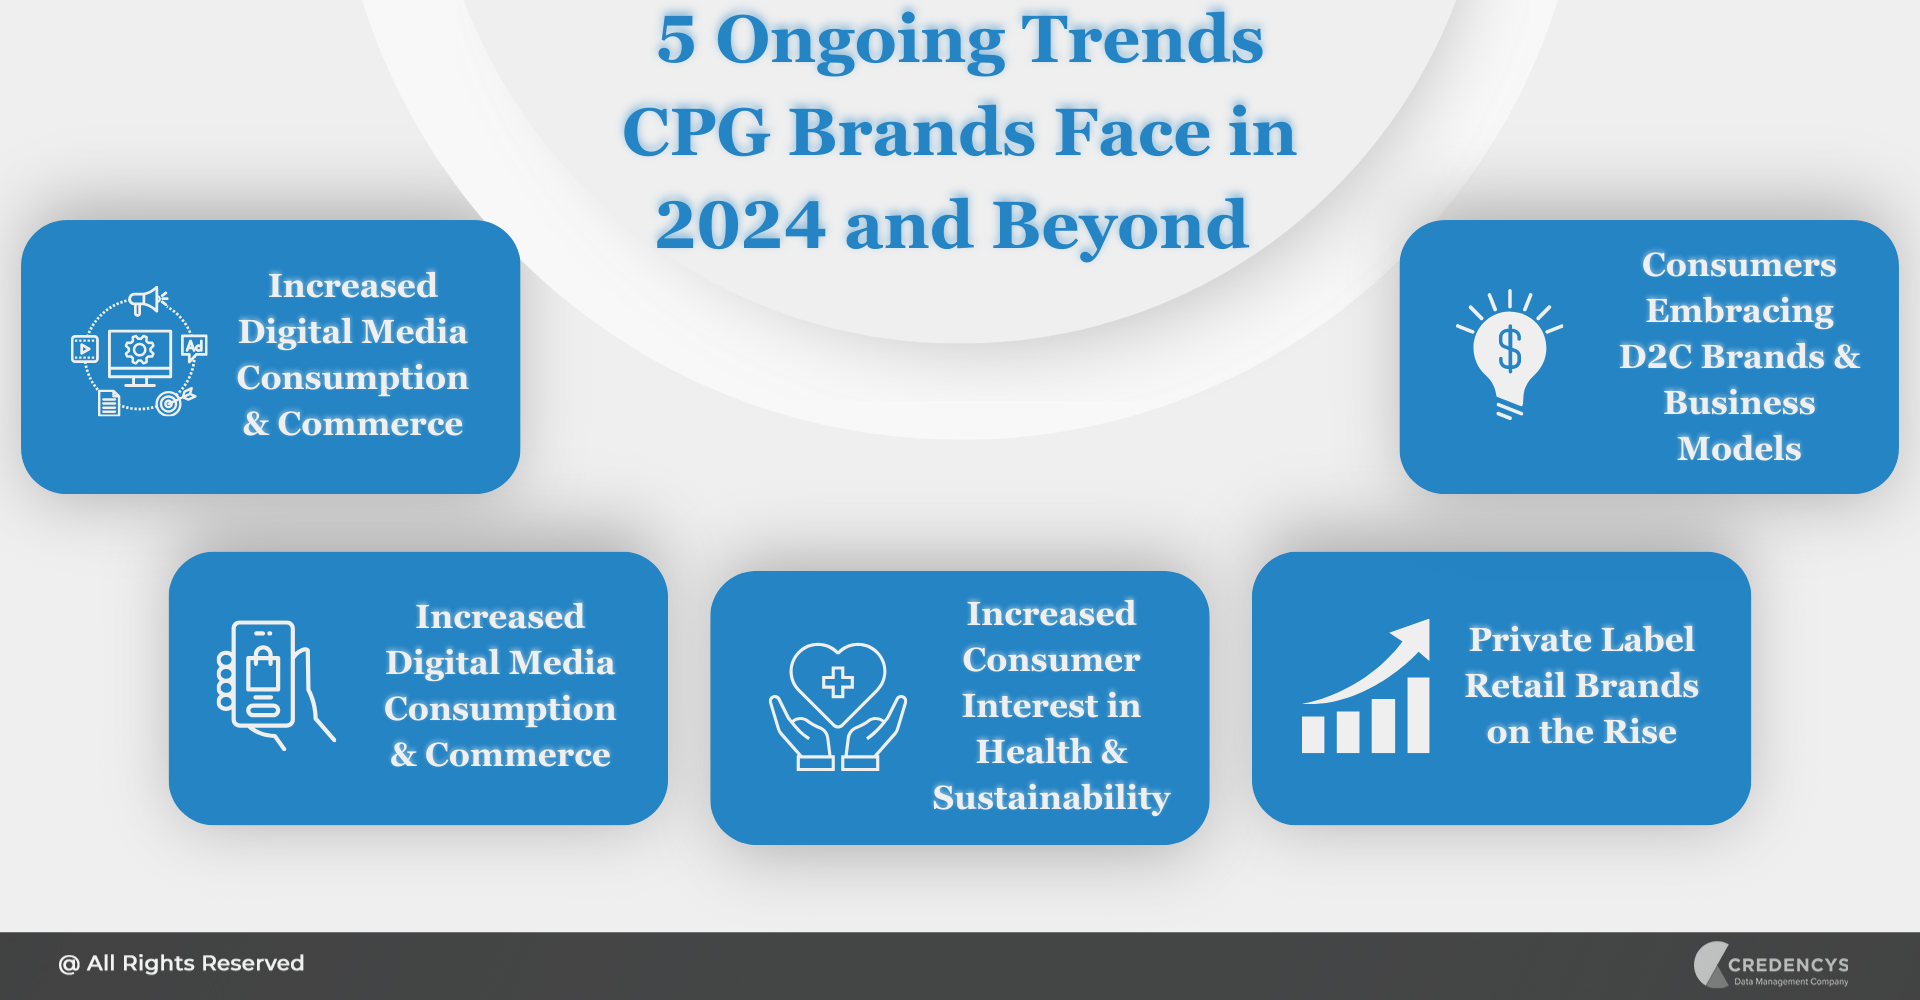 5 Ongoing Trends CPG Brands Face in 2024 and Beyond